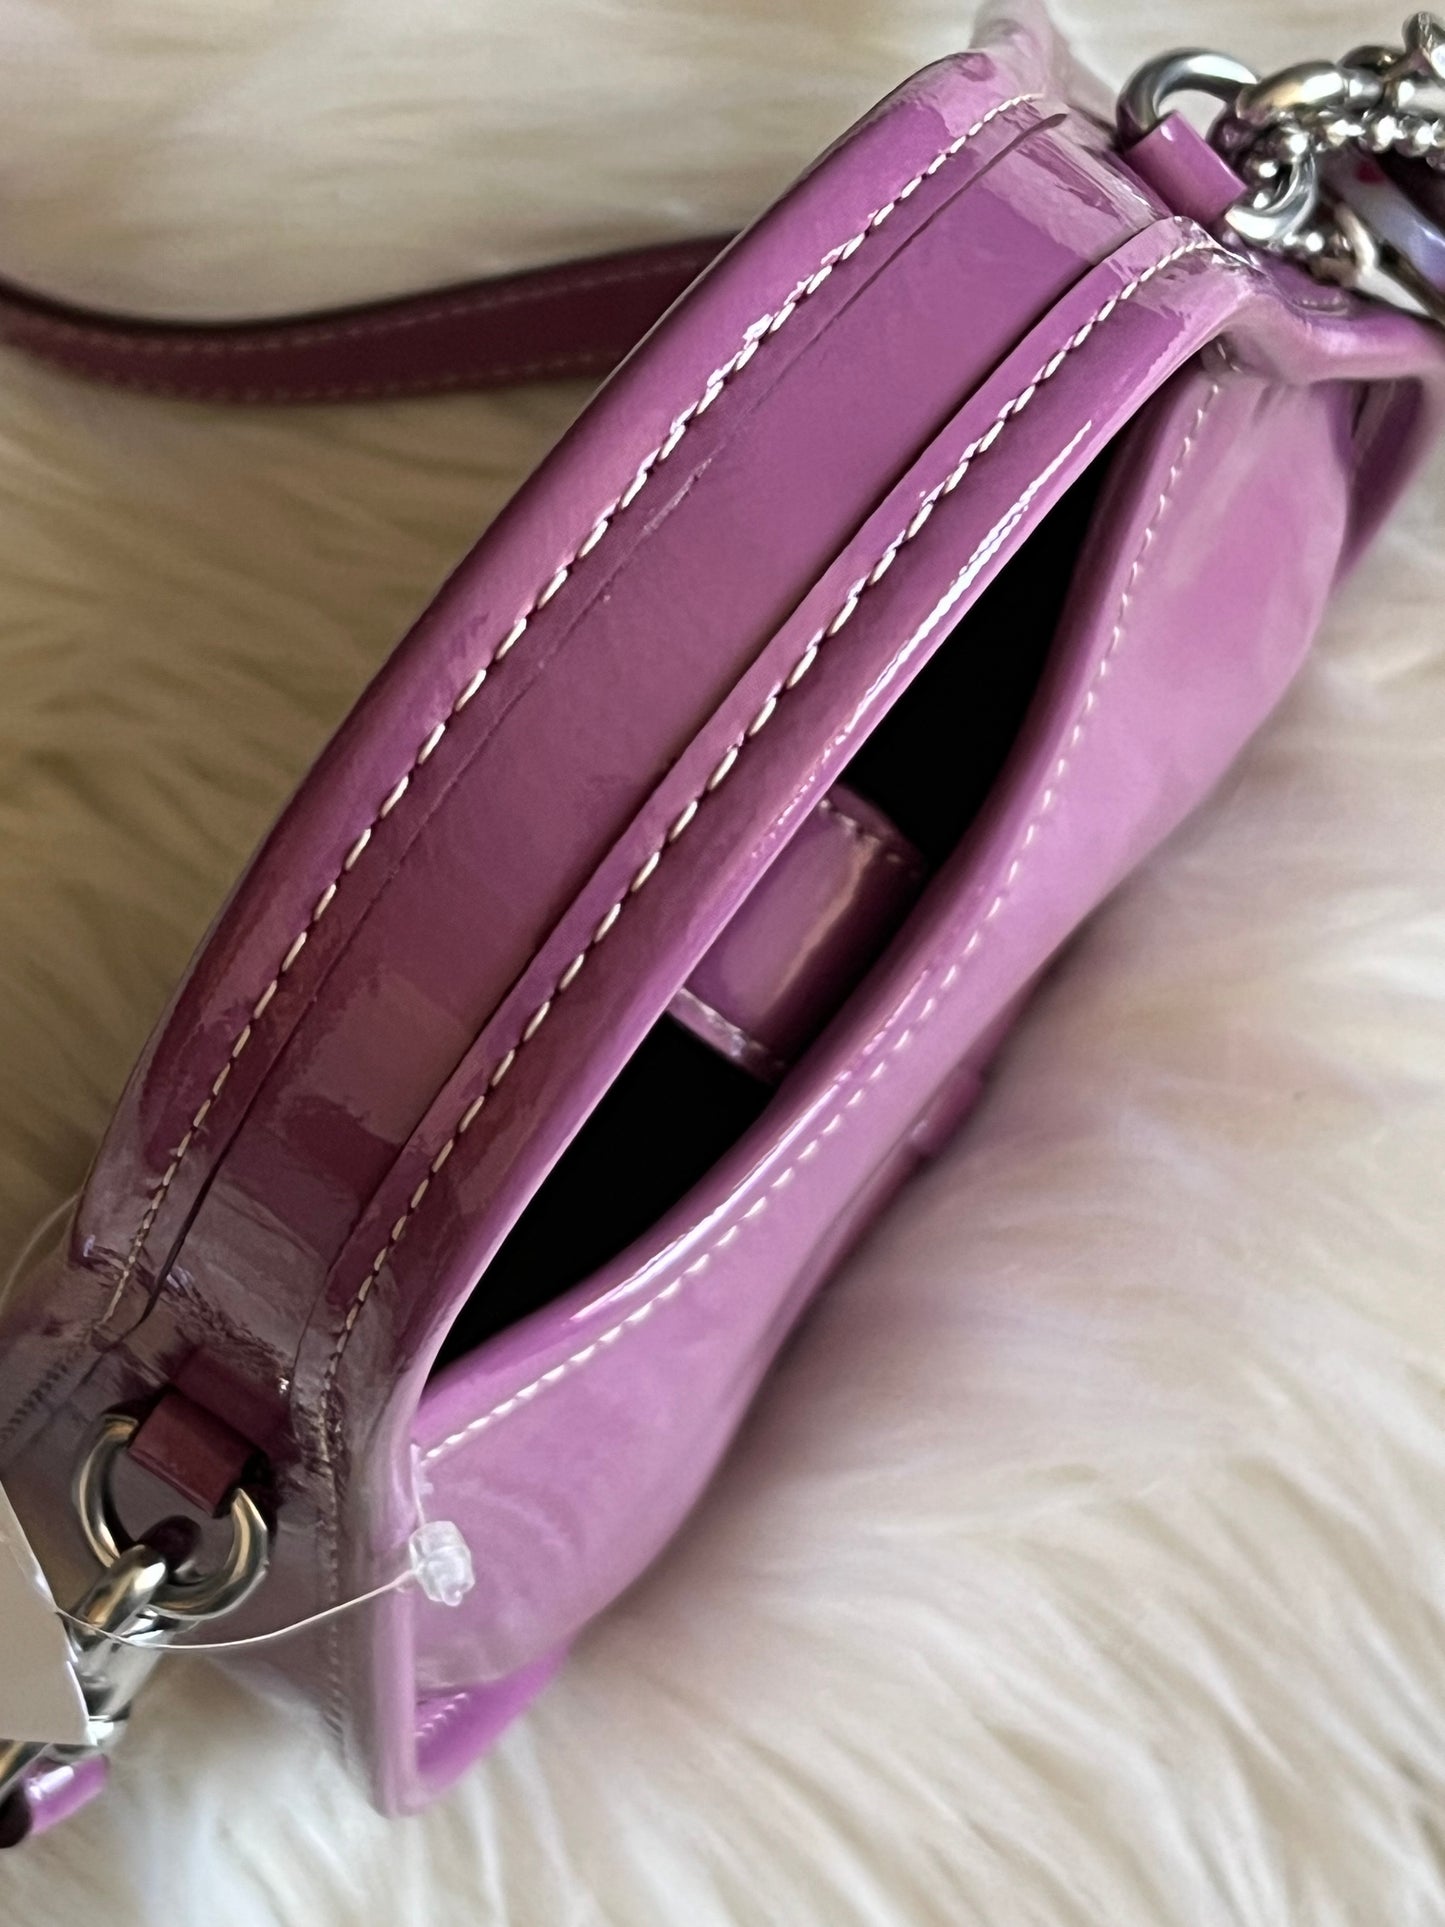 Coach Mini Ergo Bag with Crossbody Strap in Crinkled Patent Leather